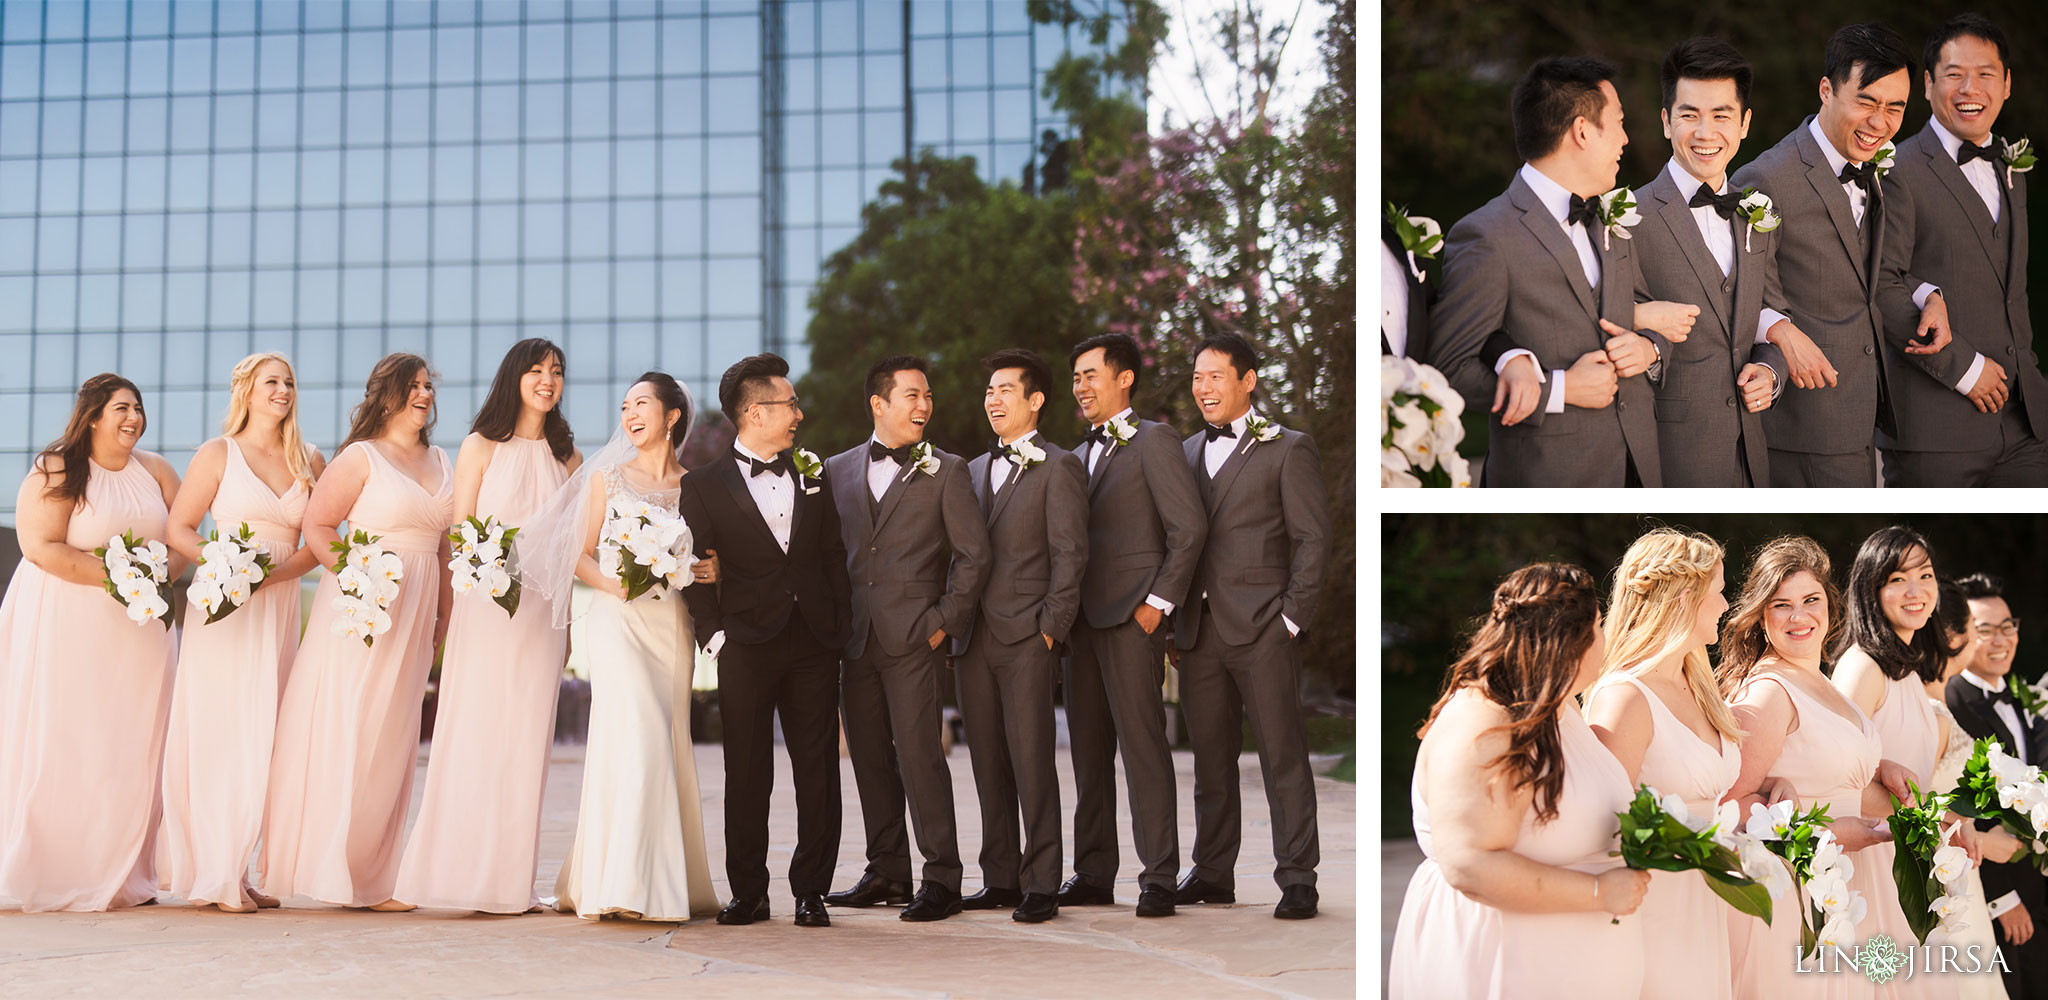 18 segerstrom center for the arts costa mesa wedding photography